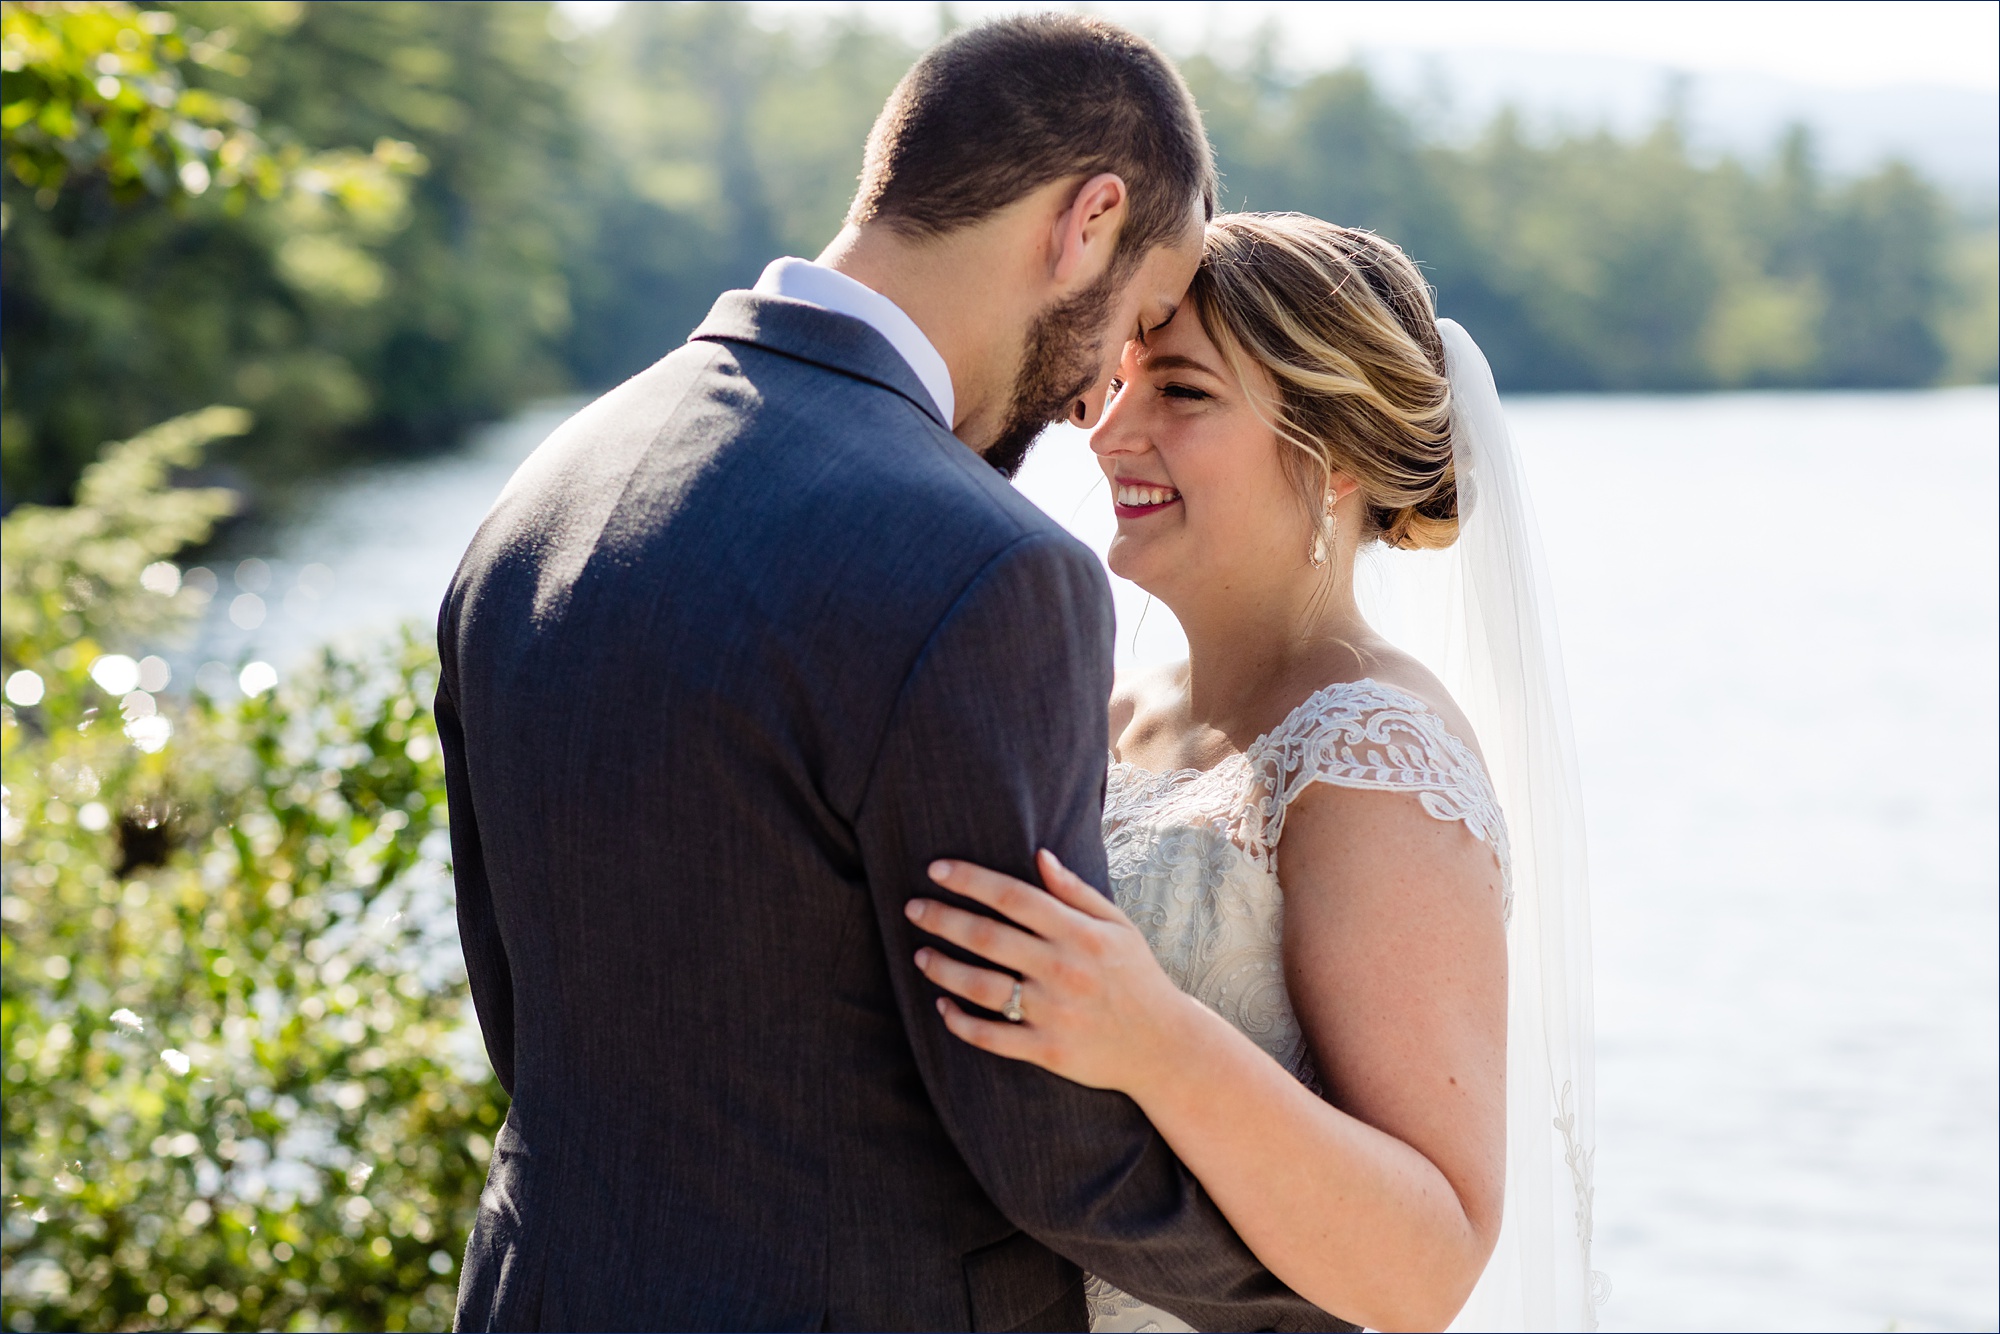 The newlyweds enjoy a quiet bit of time together at The Preserve at Chocorua NH